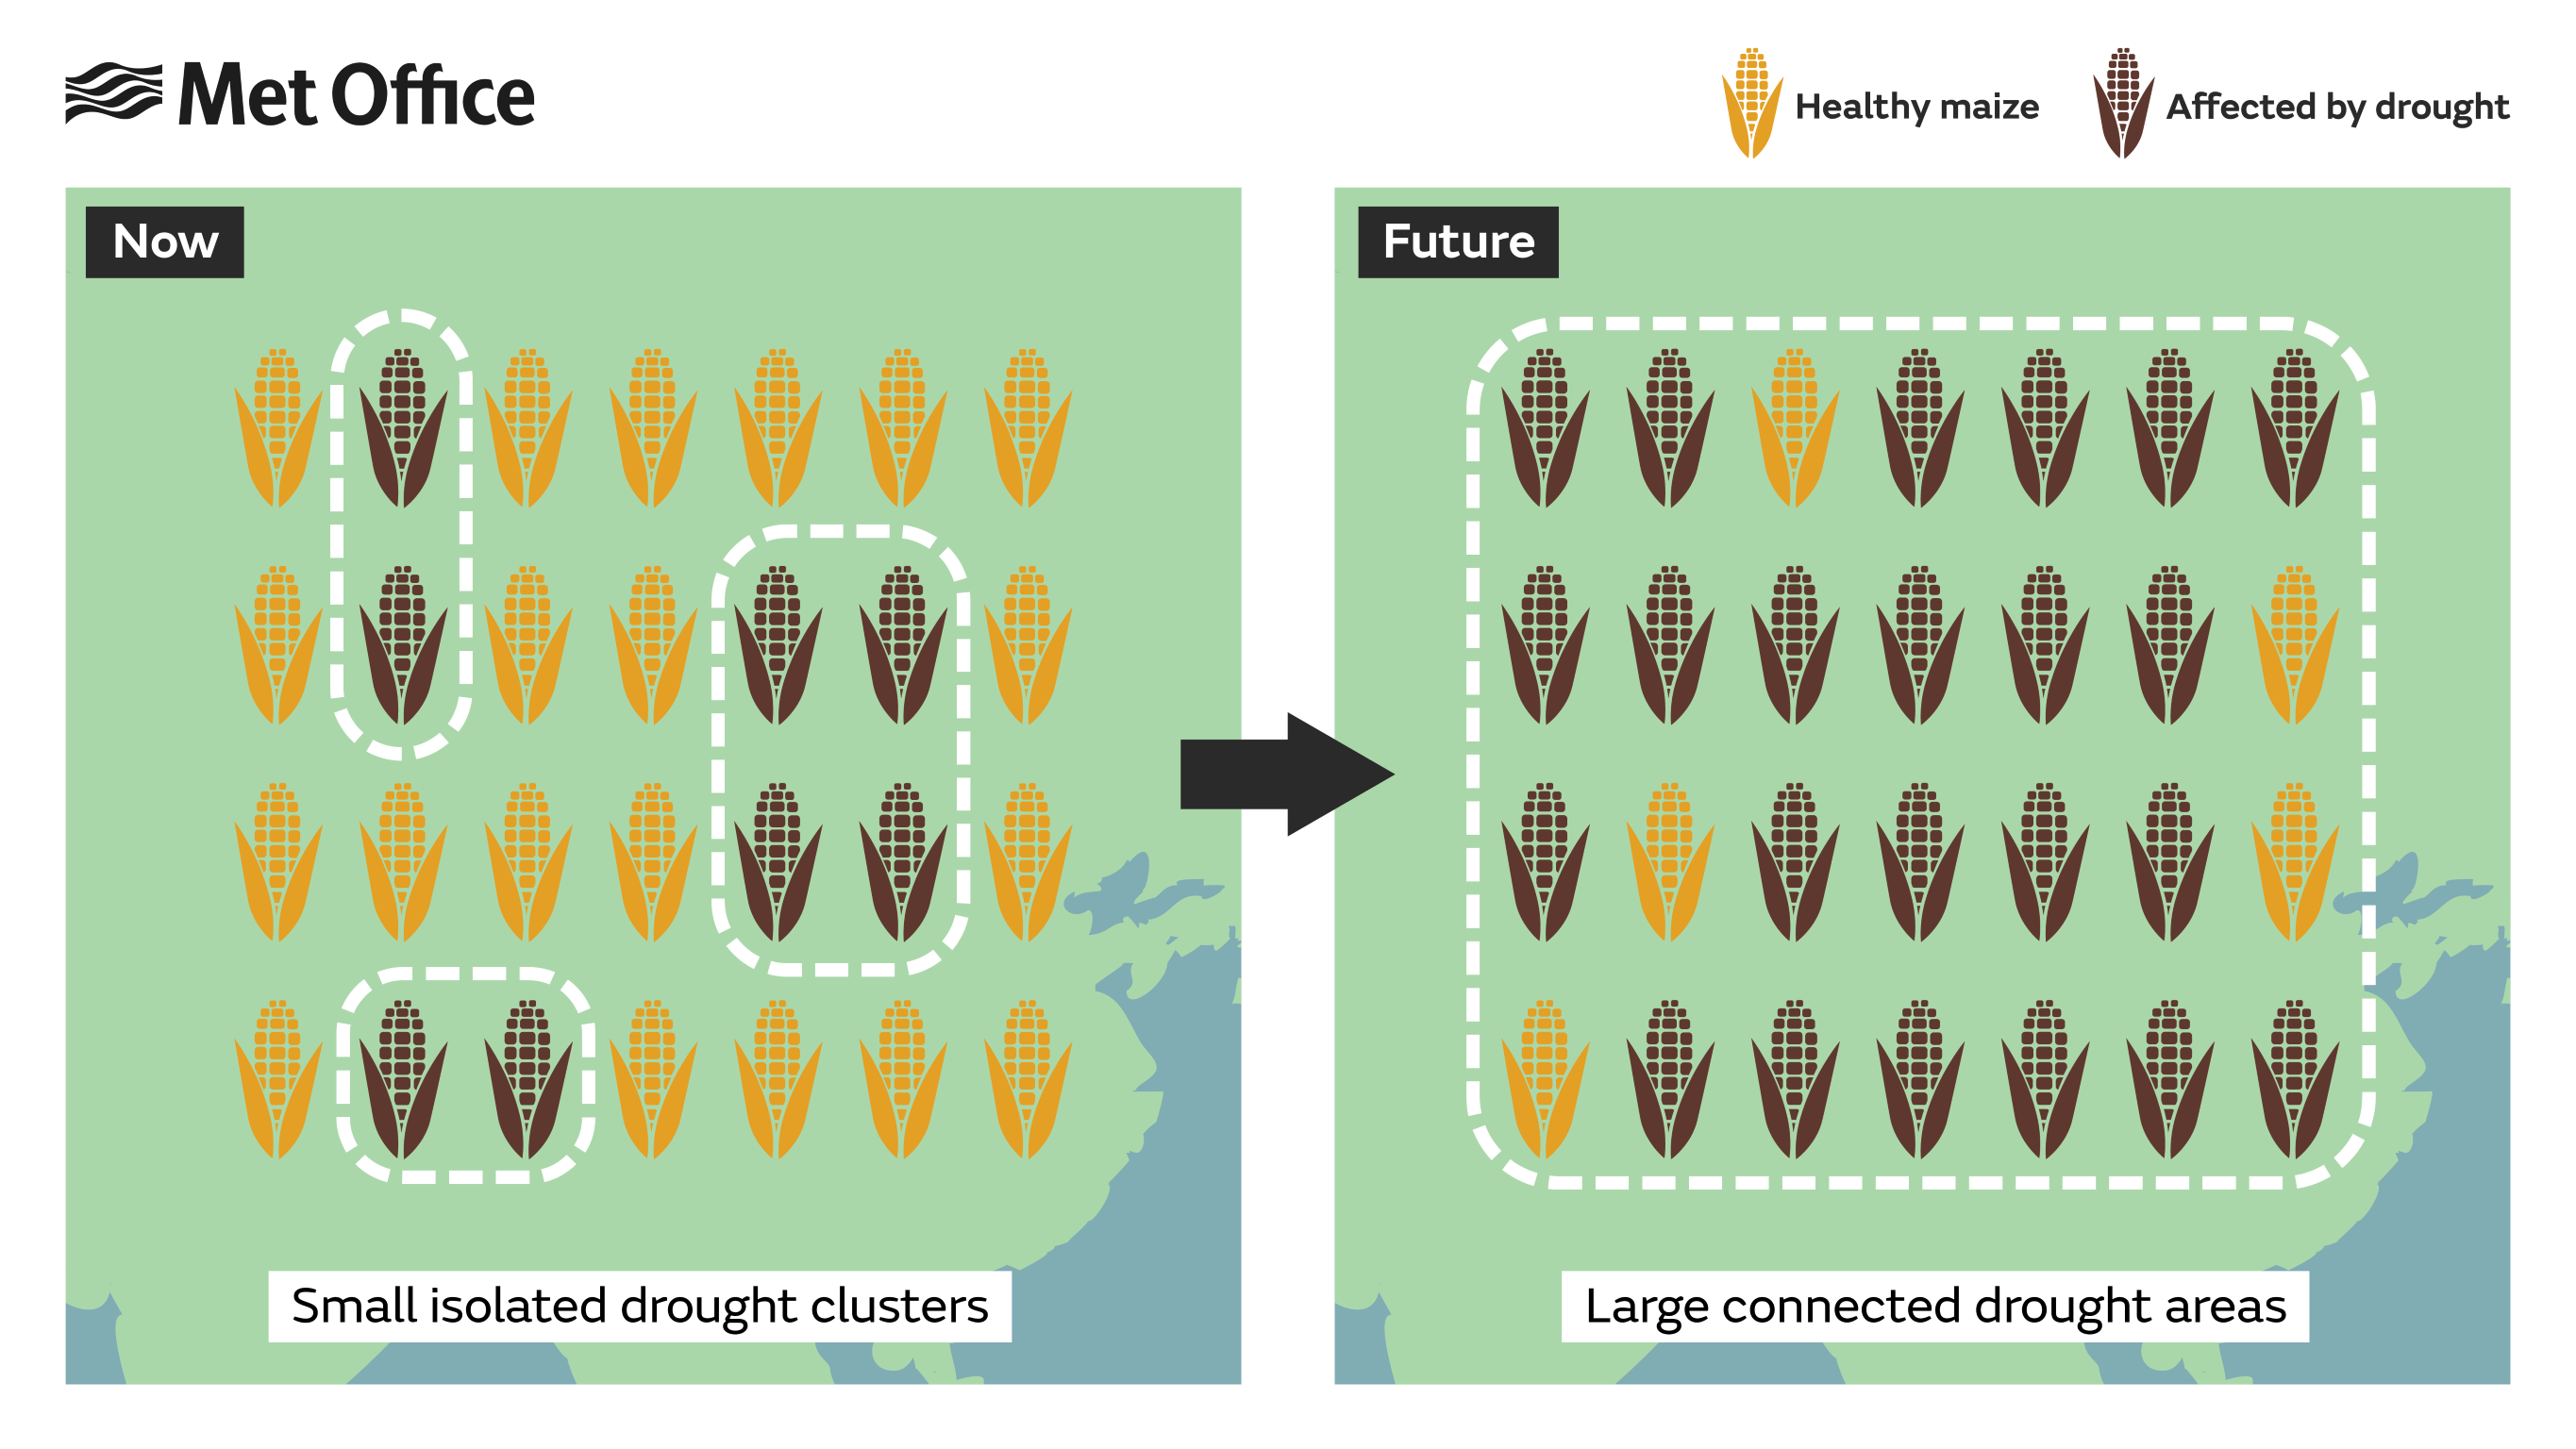 Infographic showing how in future climate conditions are more likely for larger area connecting droughts to occur